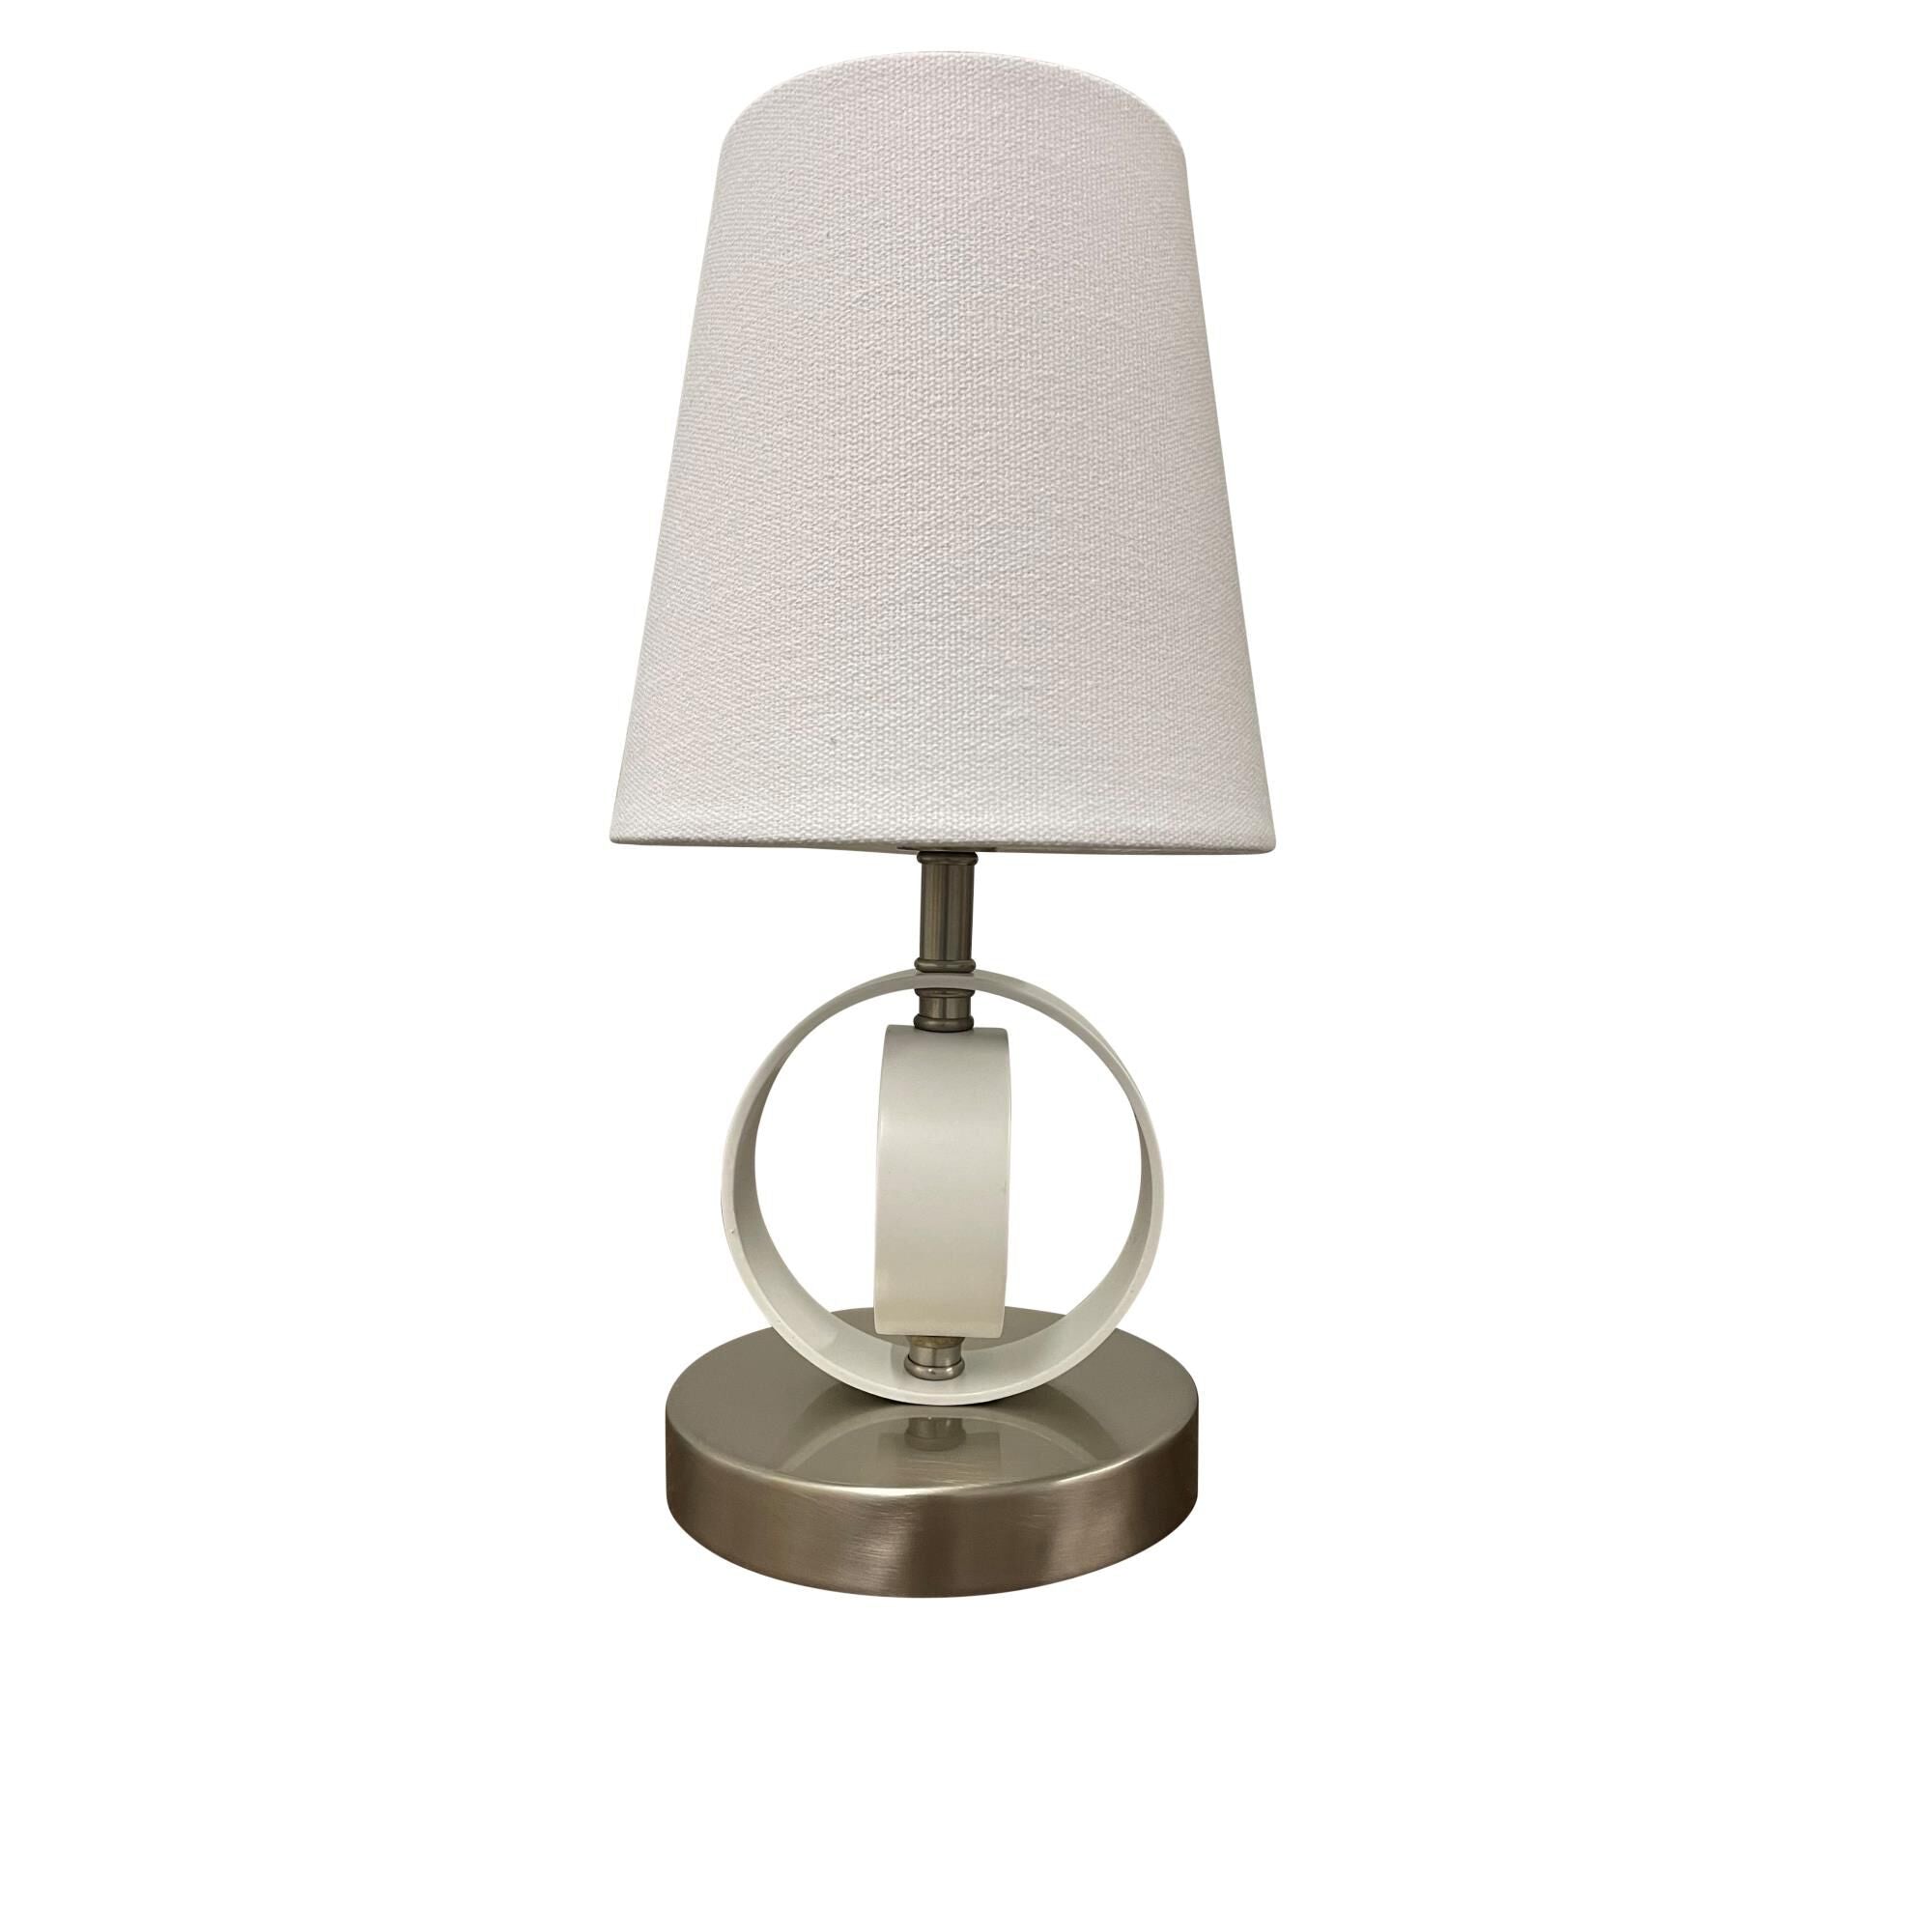 House of Troy - B209-SS/SN - One Light Accent Lamp - Bryson - Supreme Silver/Satin Nickel